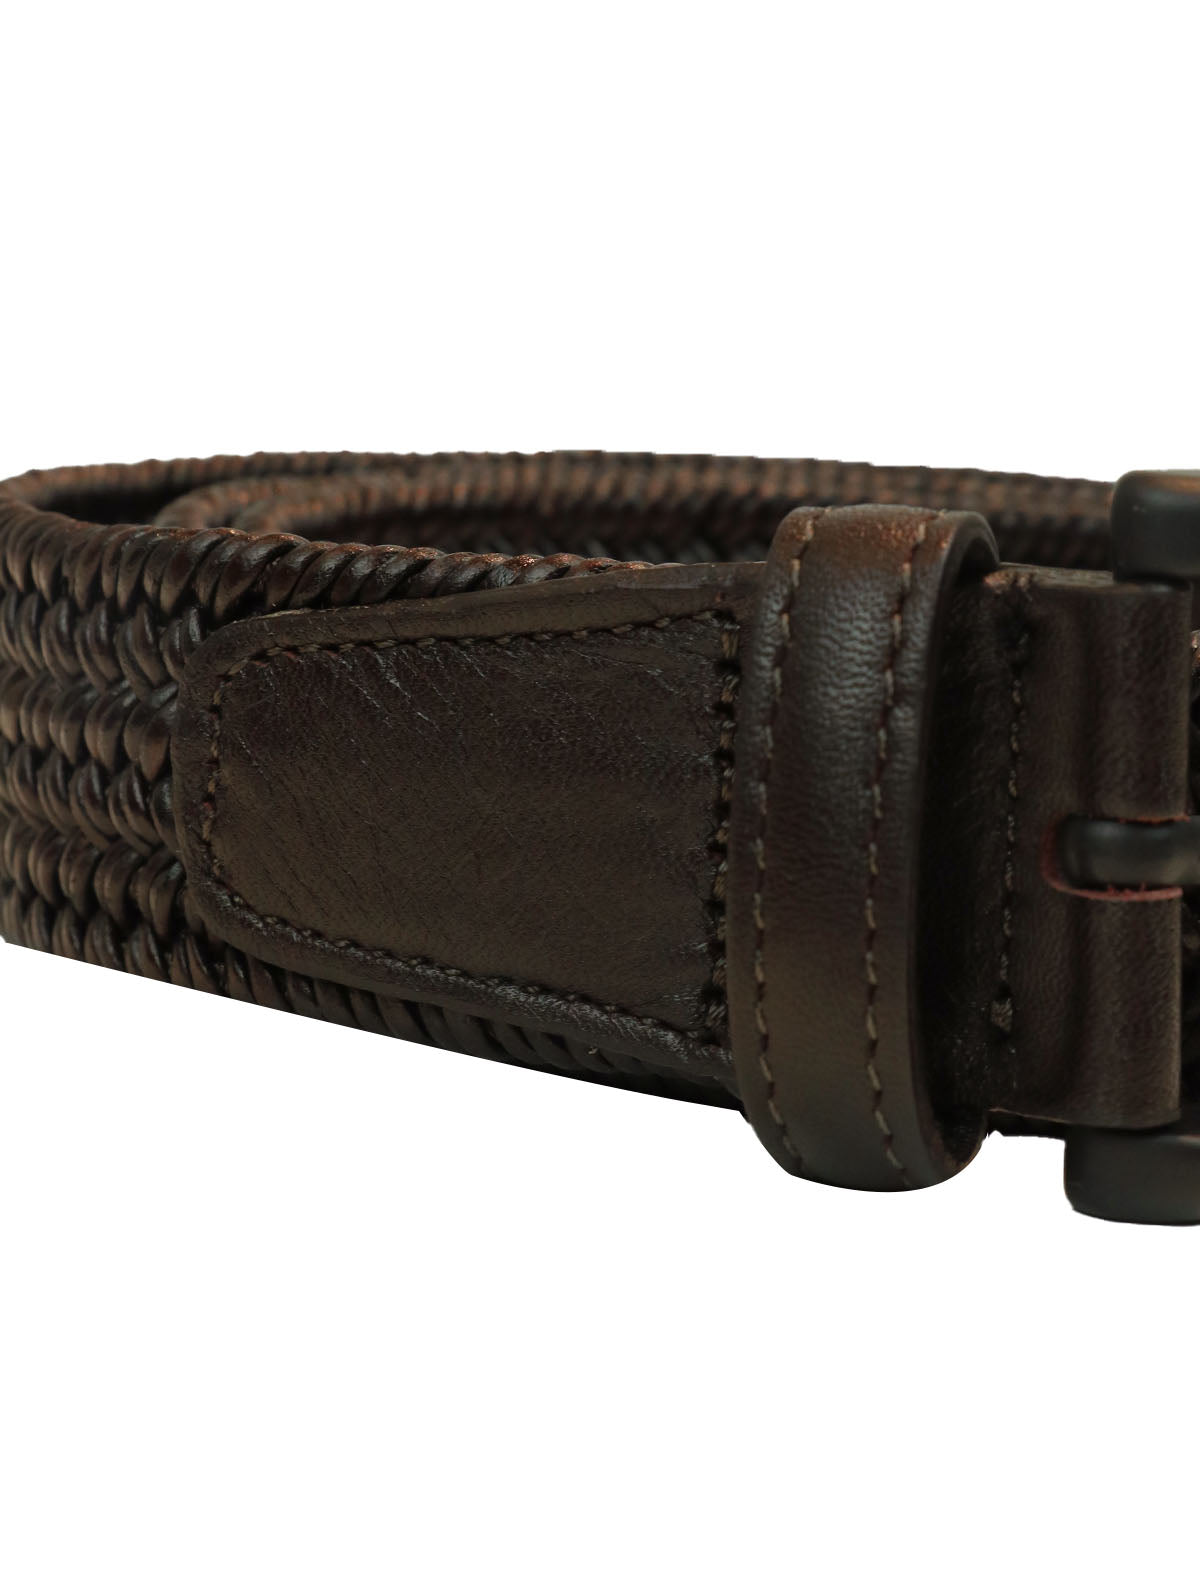 Andrea d'Amico Tonal Braided Leather Belt in Brown